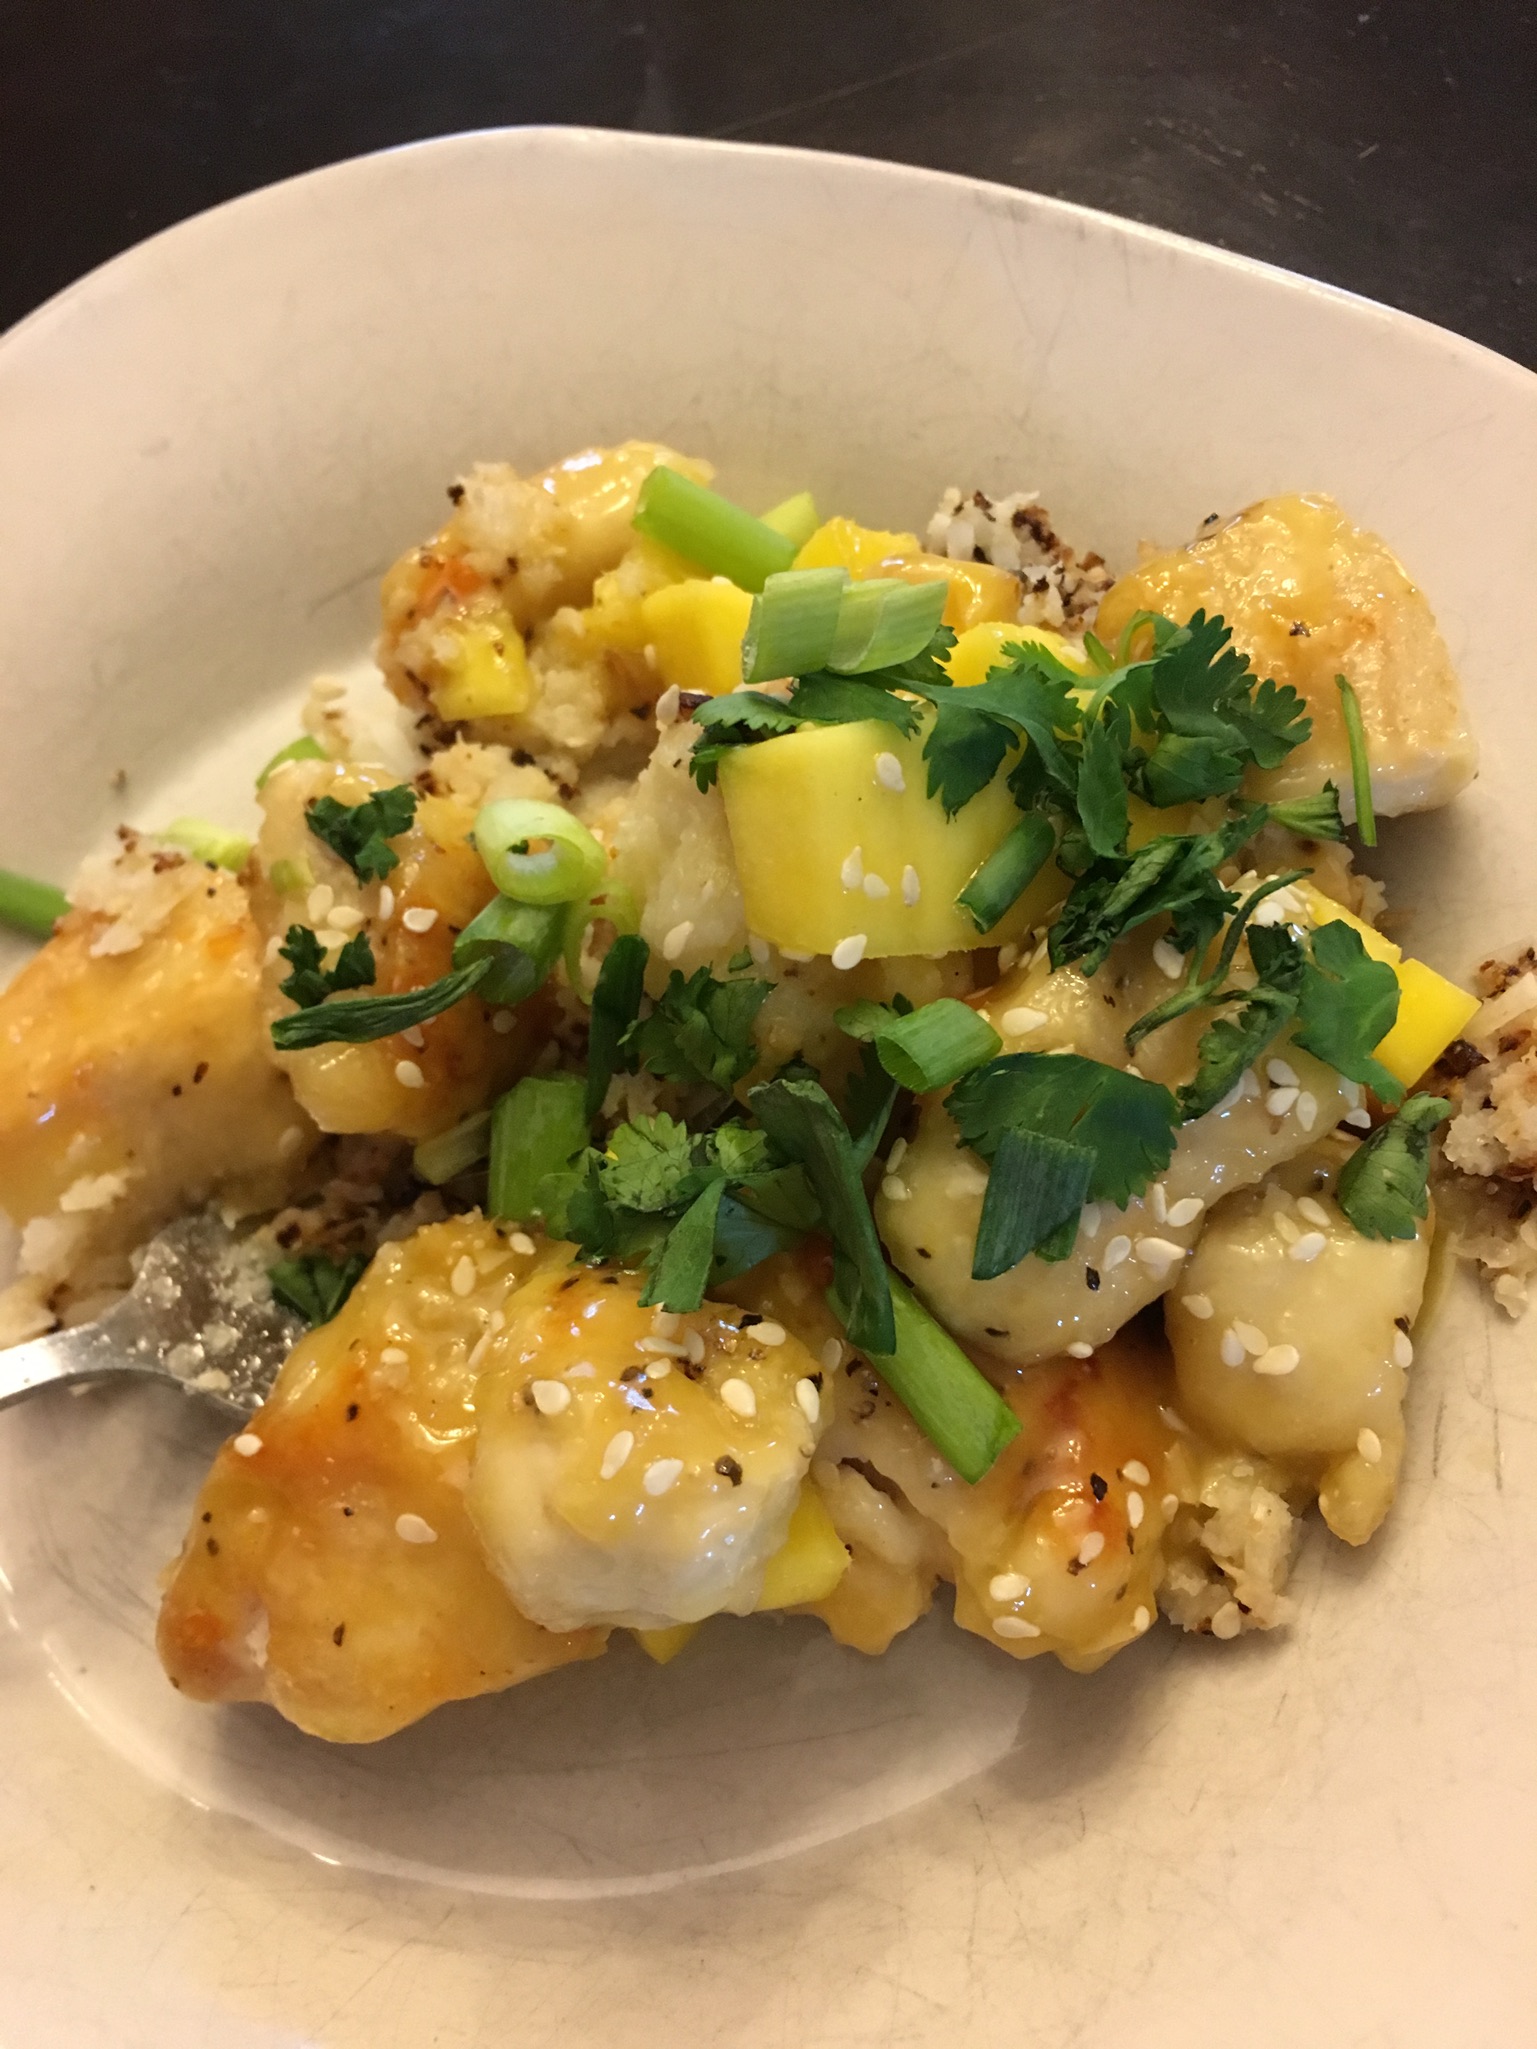 Spicy Mango Chicken, Whole30 approved